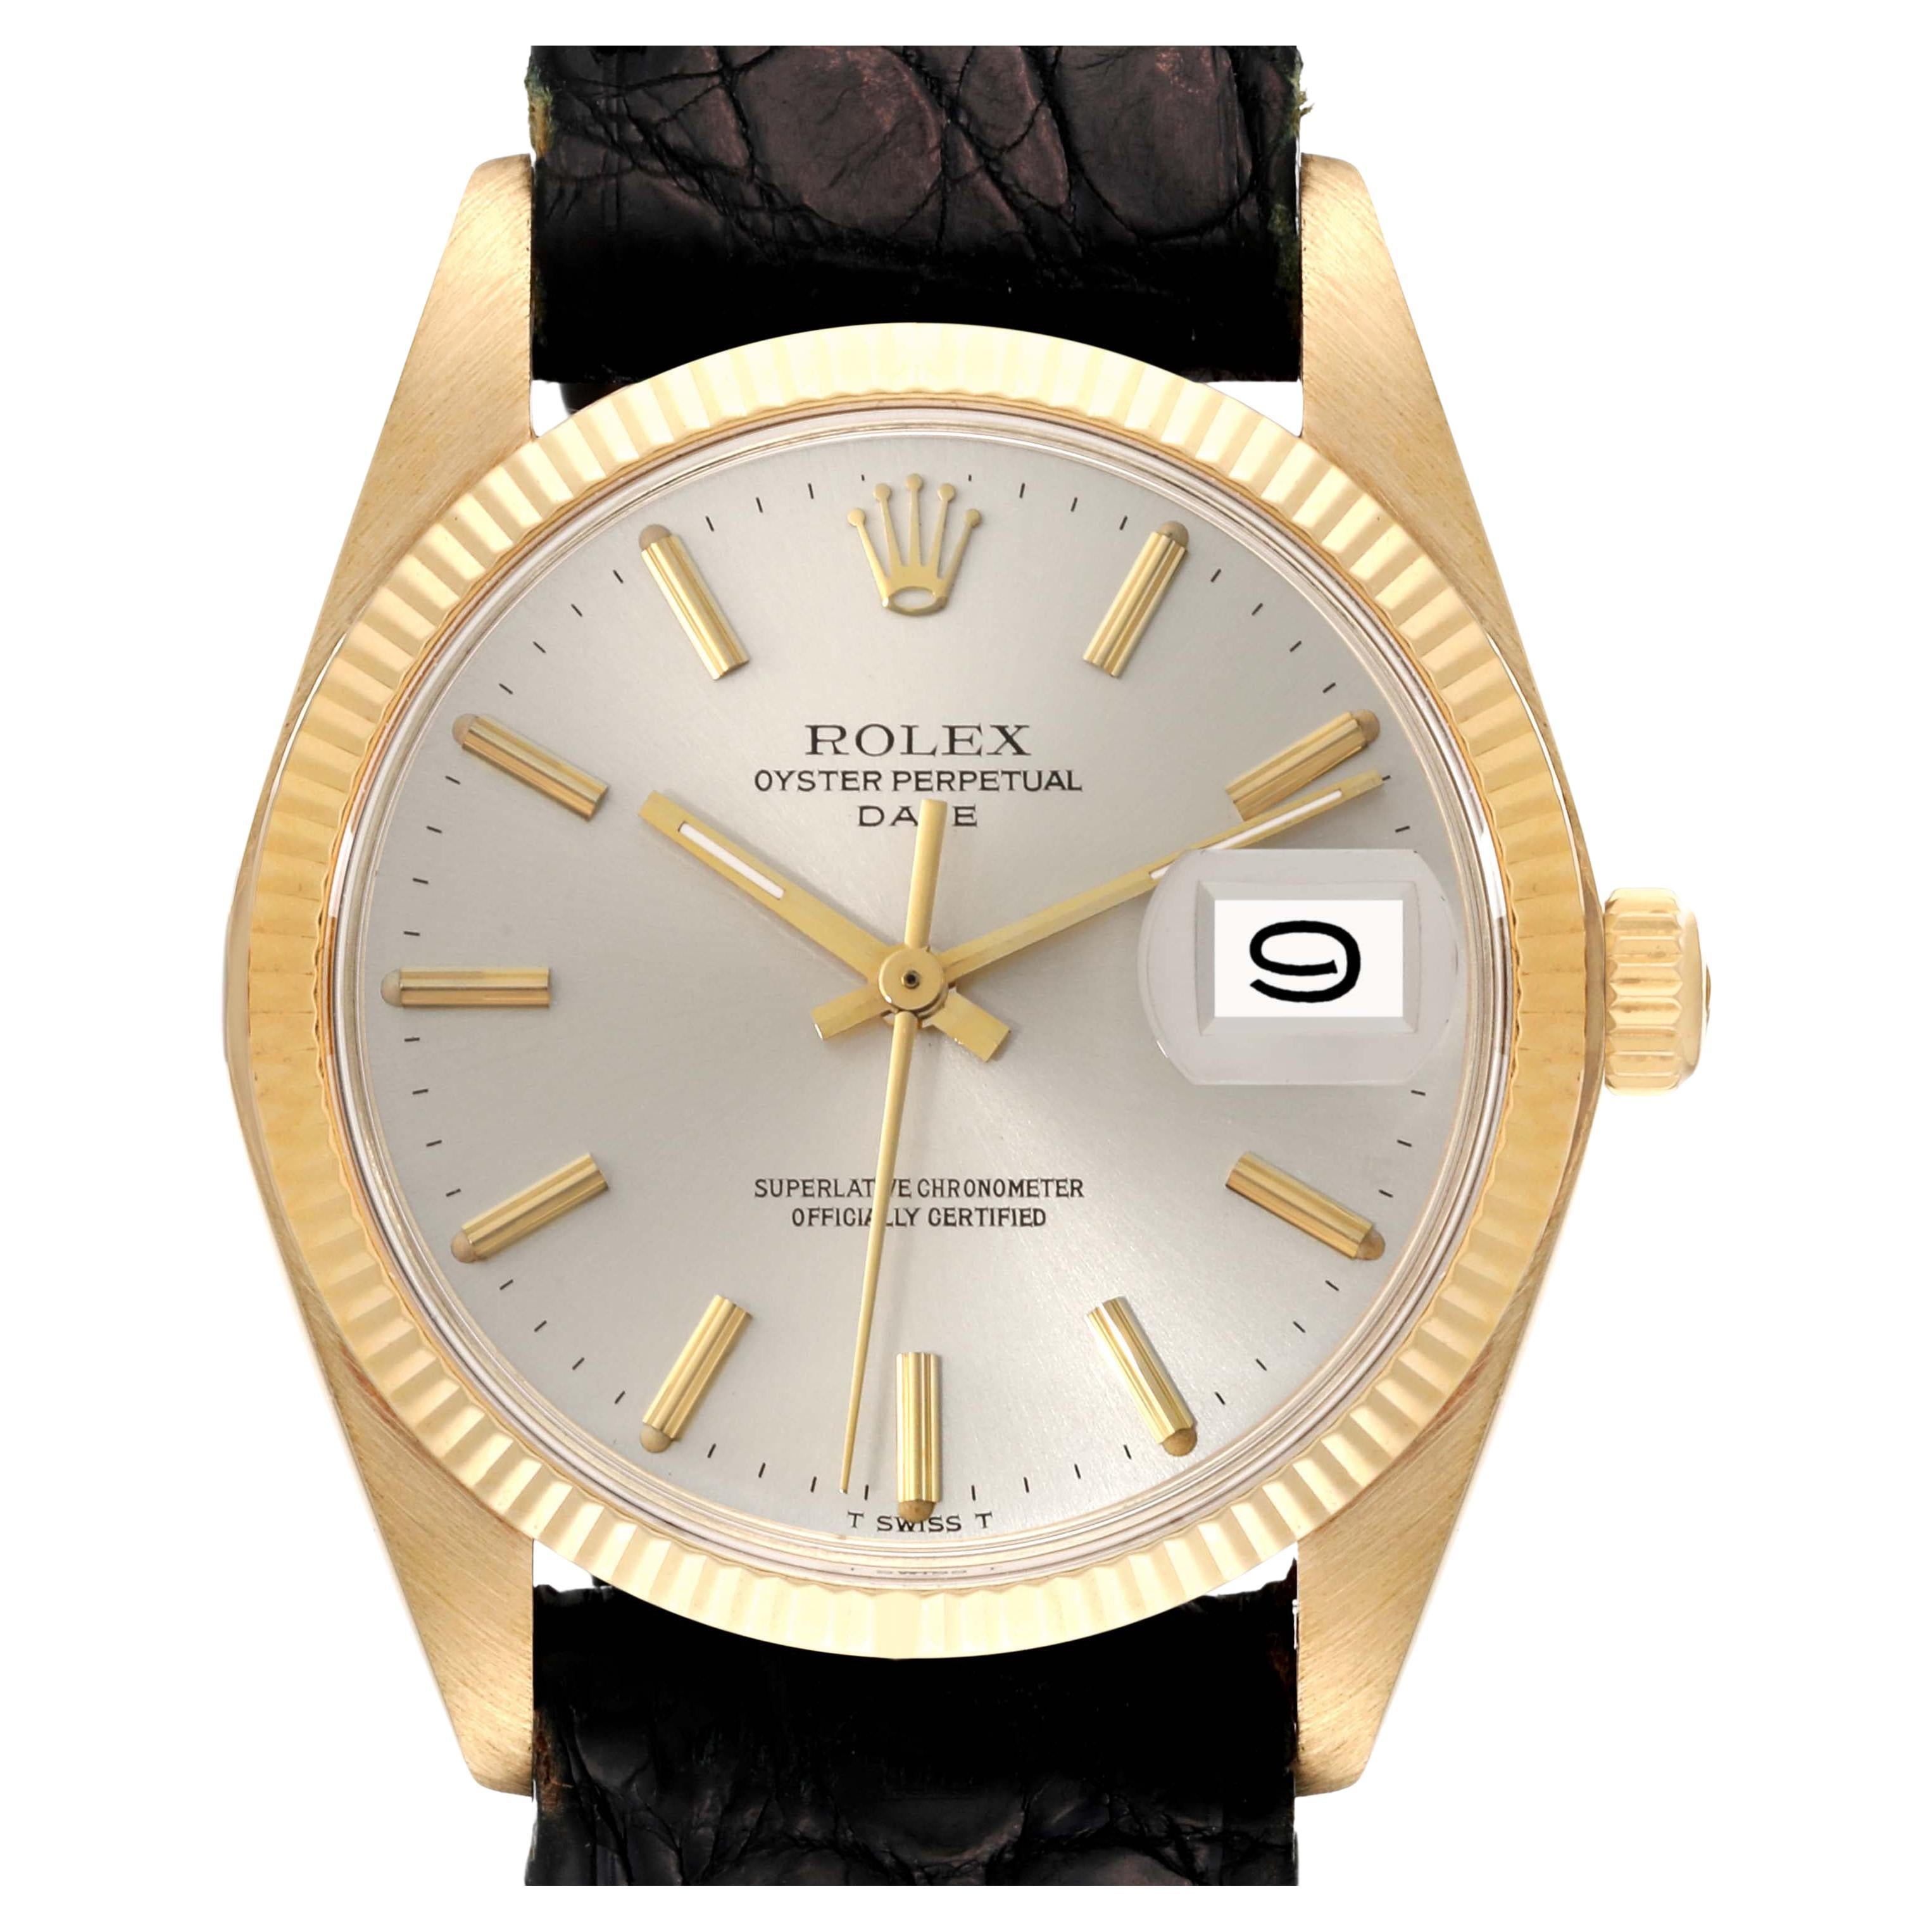 Rolex Date Yellow Gold Champagne Dial Leather Strap Vintage Mens Watch 1503